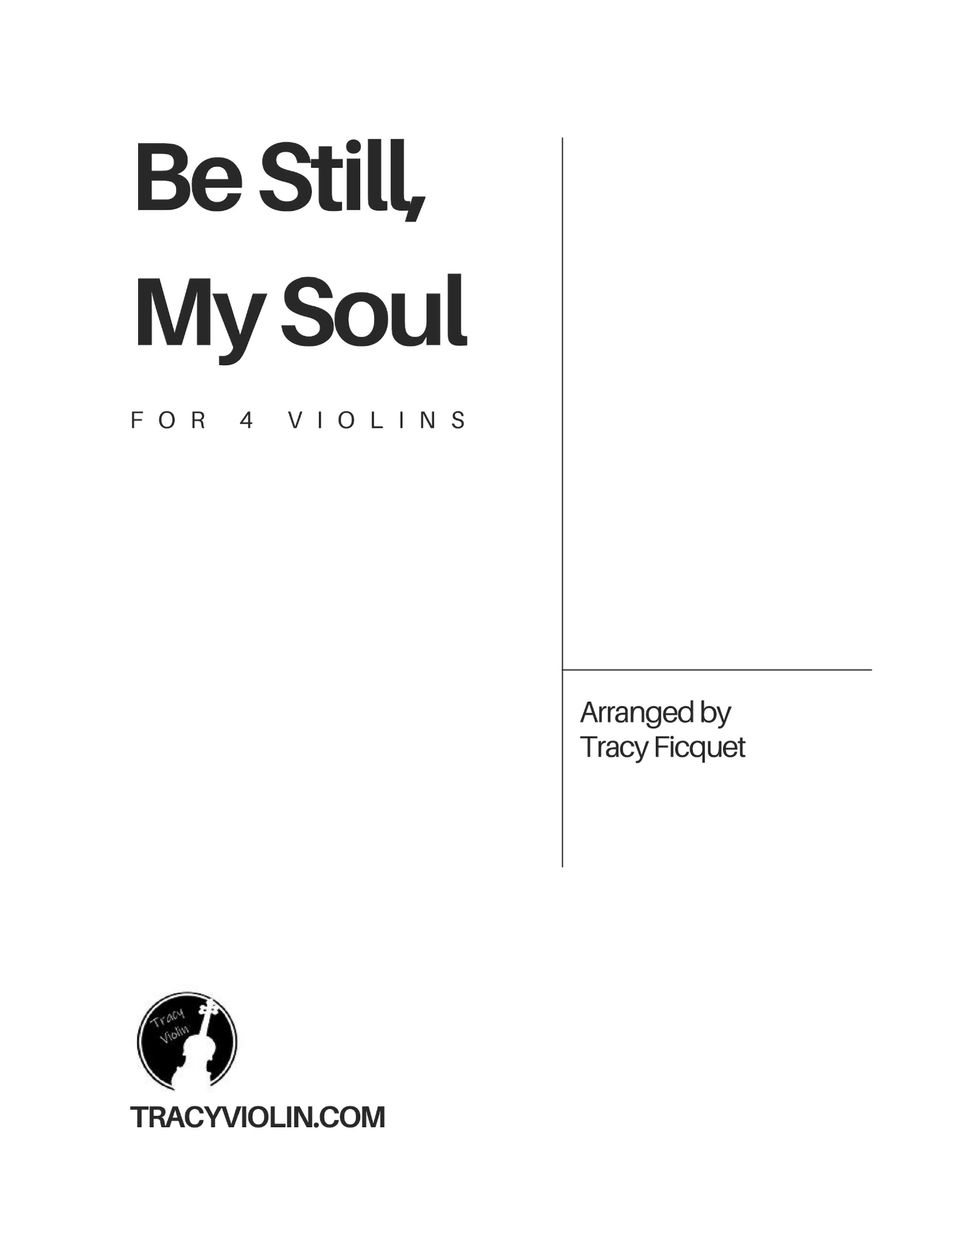 Tracy Ficquet - Be Still My Soul (For 4 Violins) by Tracy Ficquet